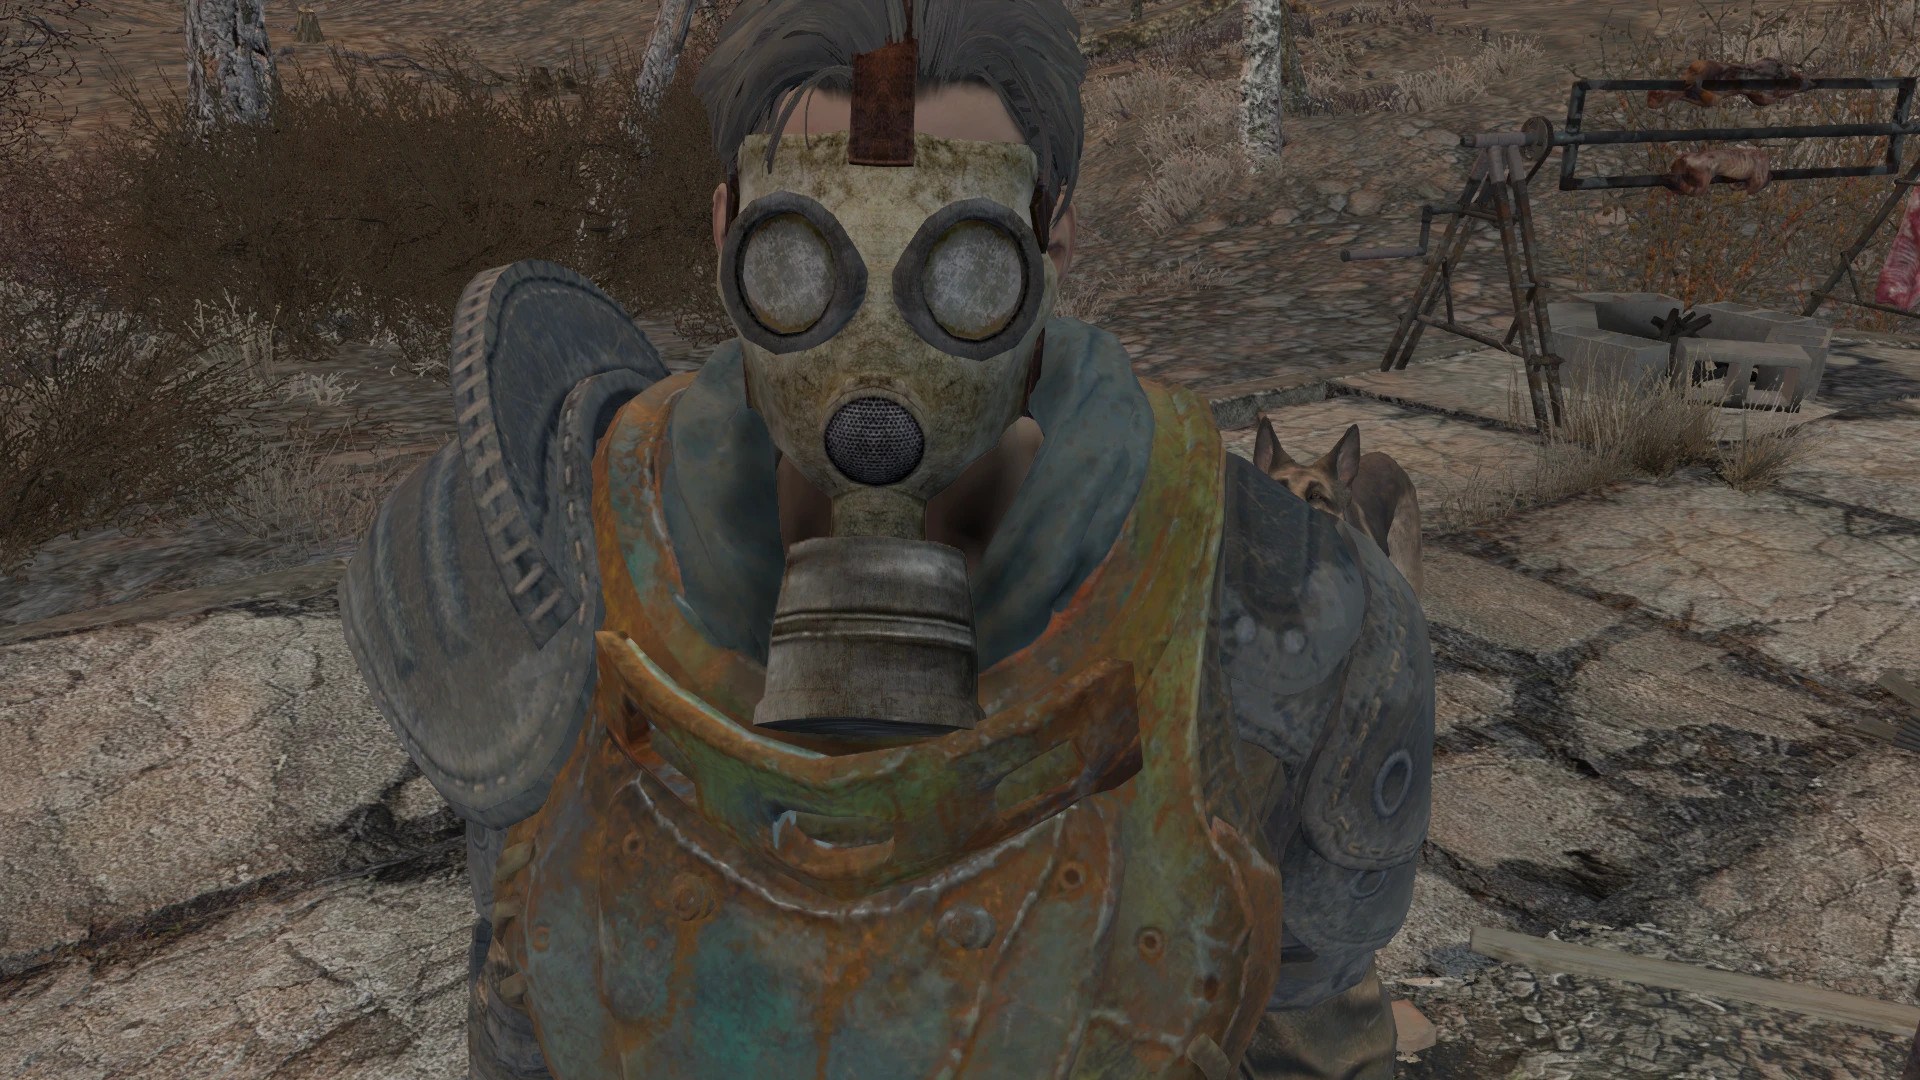 fallout 4 revert to previous version